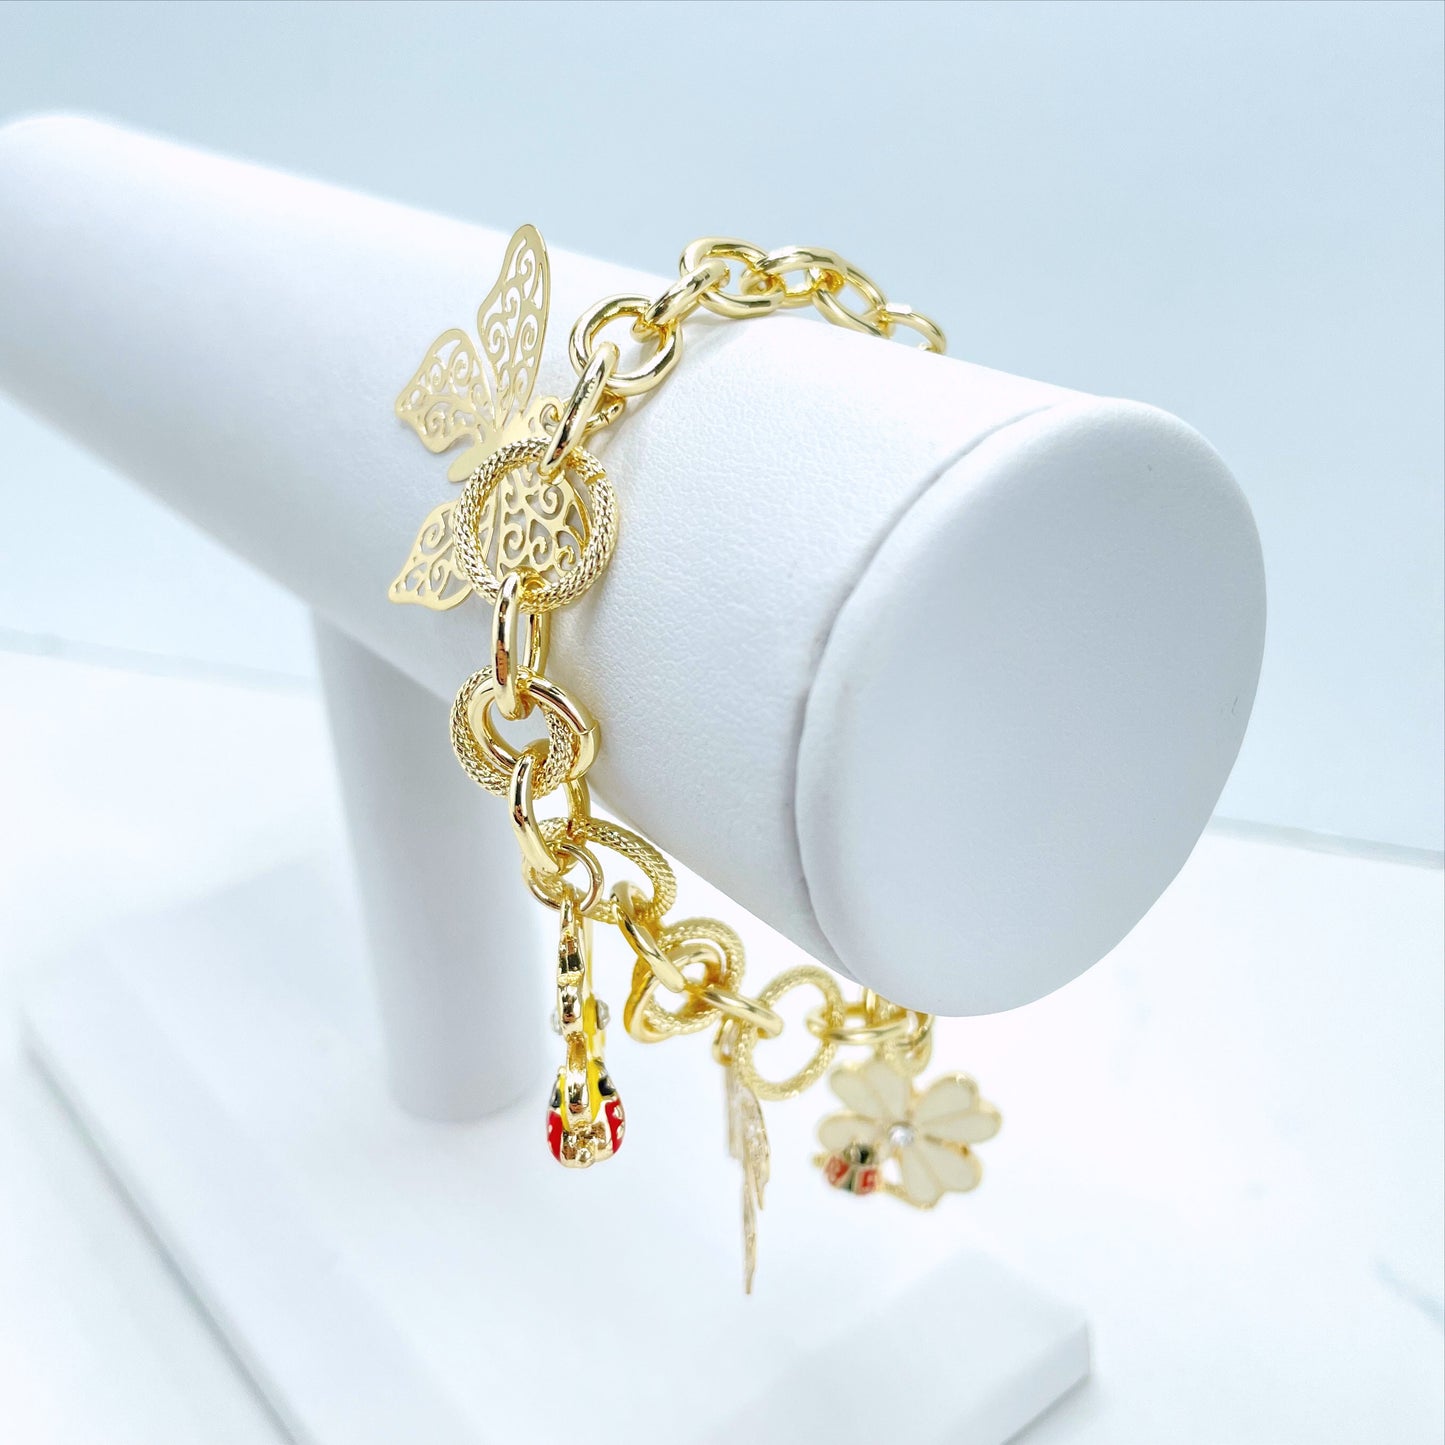 18k Gold Filled Colored Enamel Flowers and Ladybugs Charms, CZ & Butterflies in Texturized Link Bracelet, Wholesale Jewelry Making Supplies